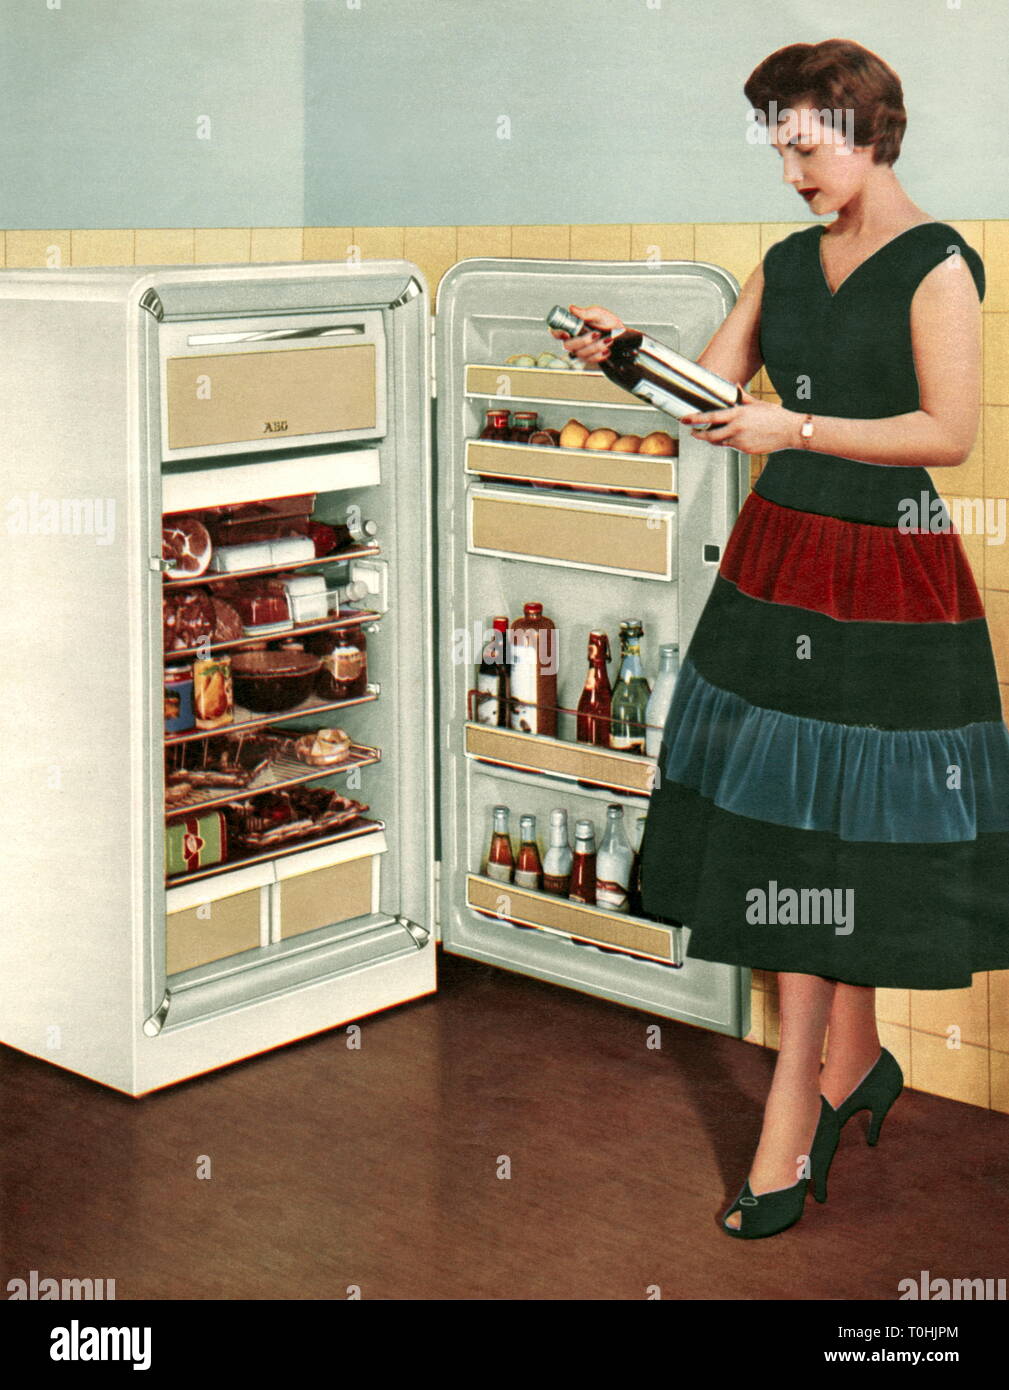 household, housewife at refrigerator, advertising, AEG, Germany, 1957, Additional-Rights-Clearance-Info-Not-Available Stock Photo